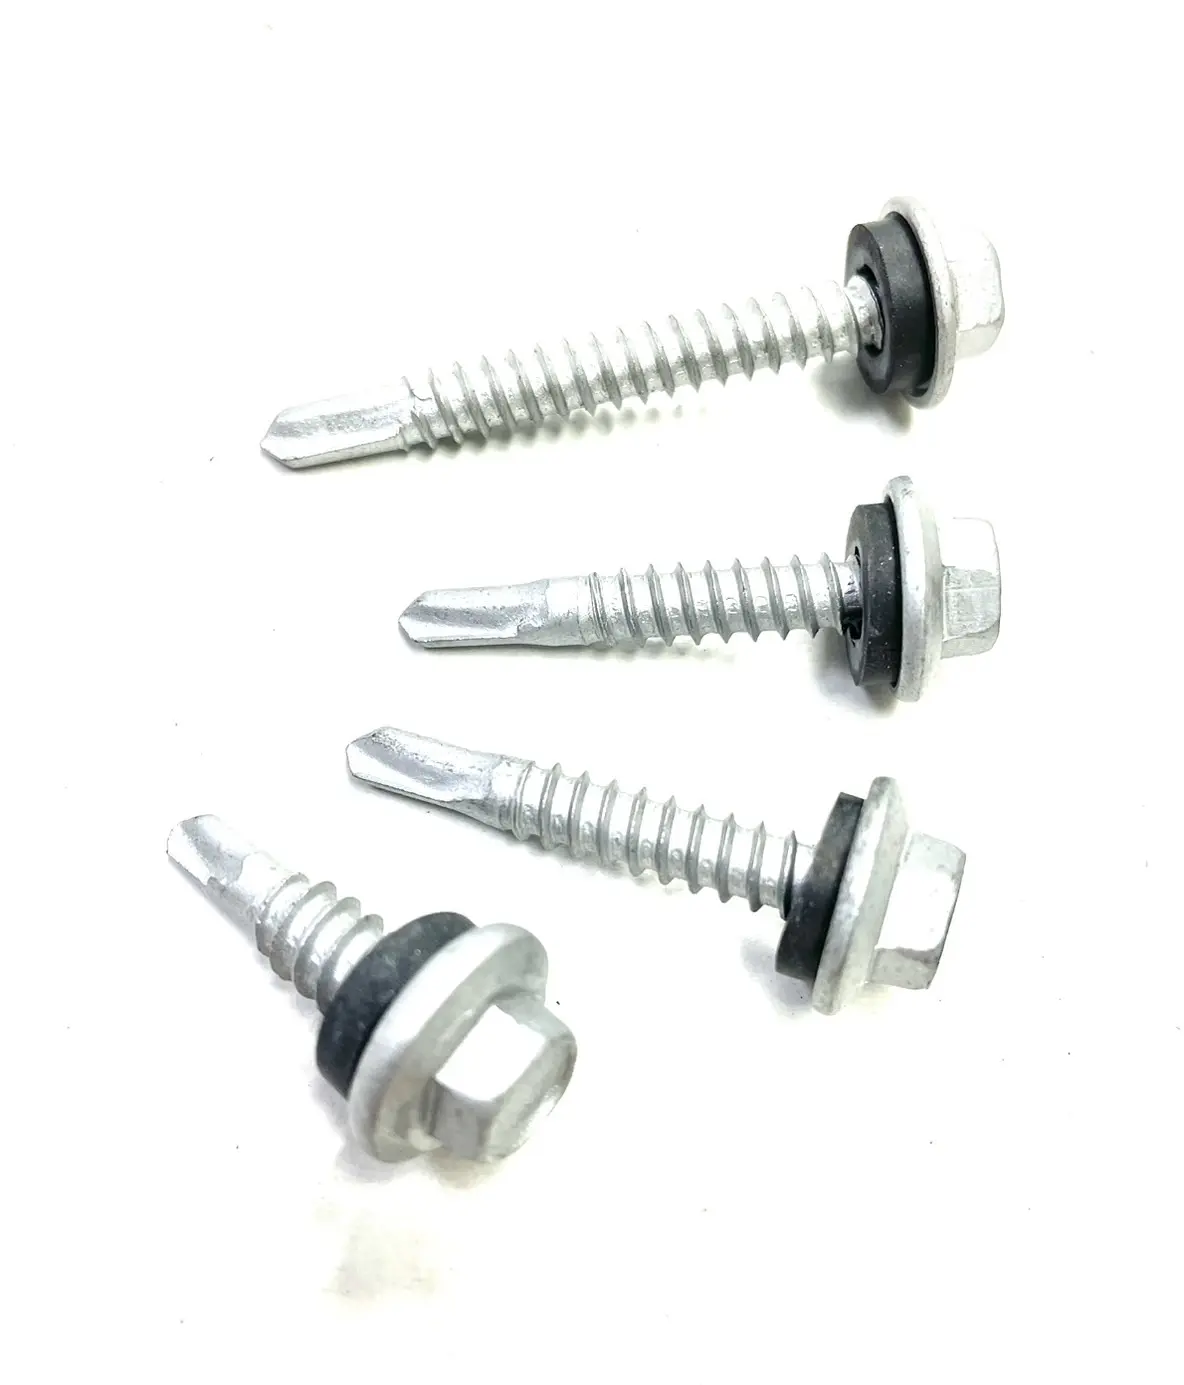 Roofing Screws -hex flange washer head with epdm washers made in Taiwan Self drilling point